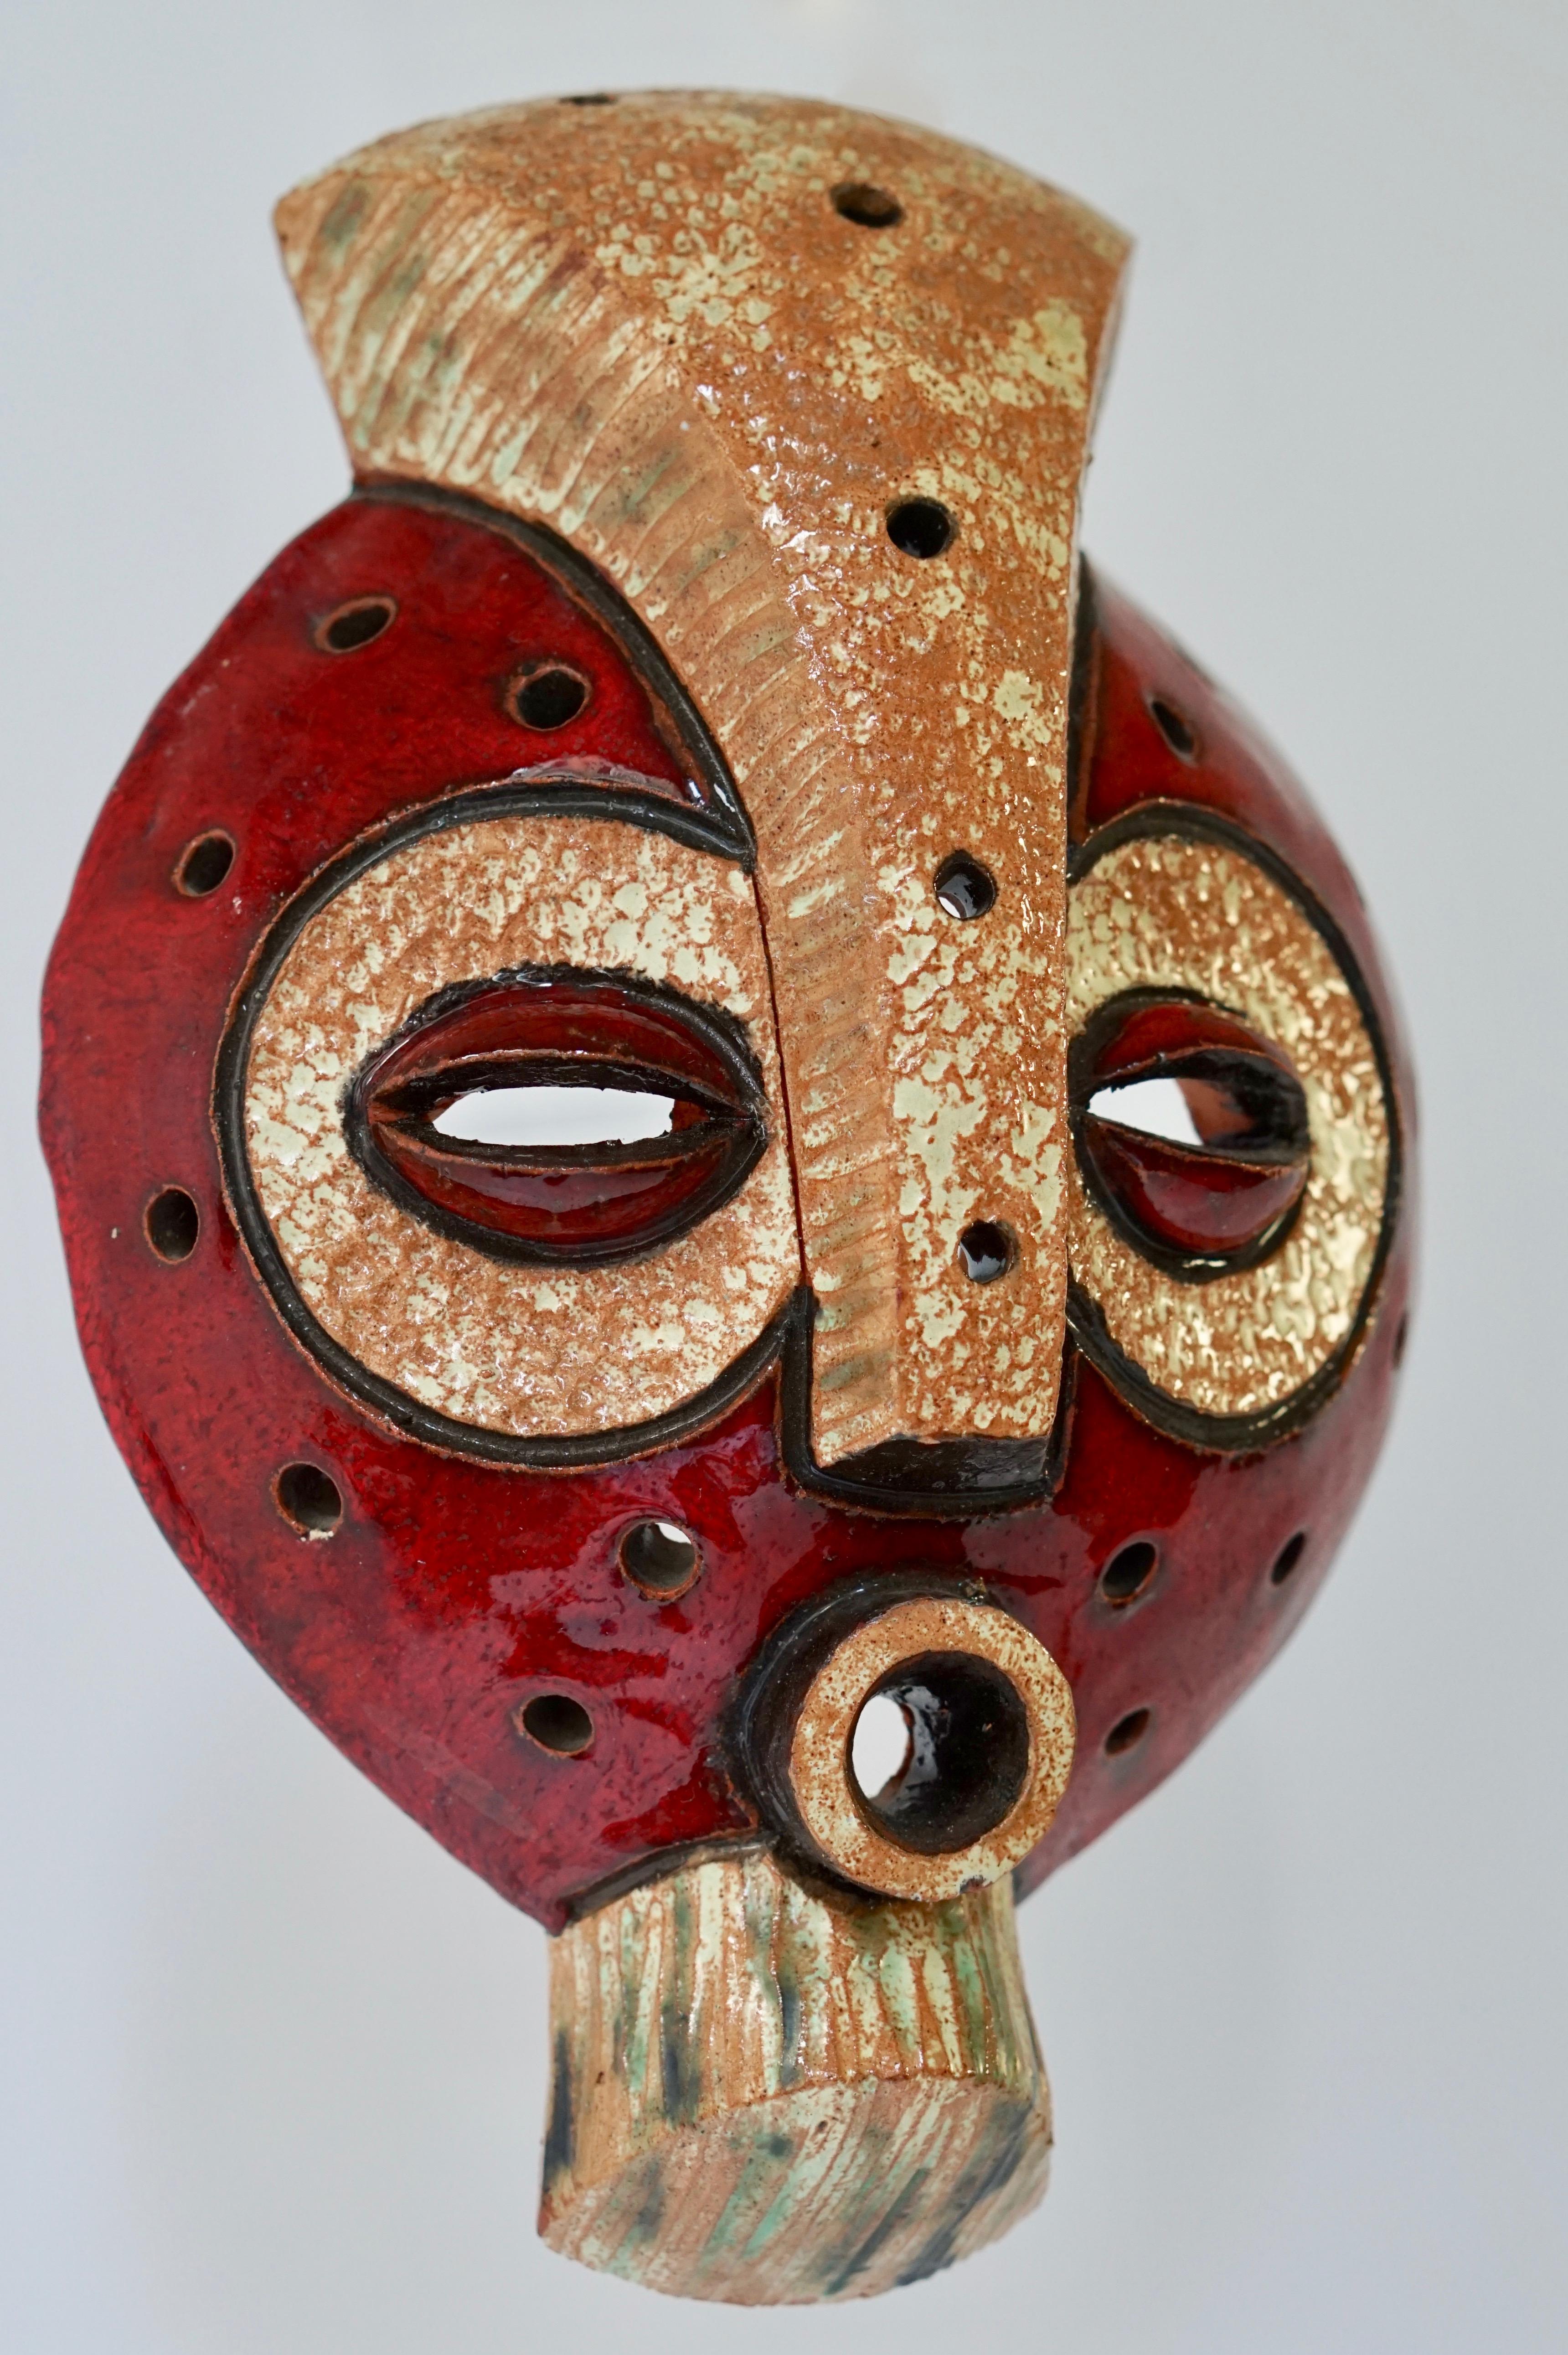 A relief of an African tribal mask, red glaze on brown fired clay.
Signed Napewaa.
Measures: Height 23 cm.
Width 12 cm.